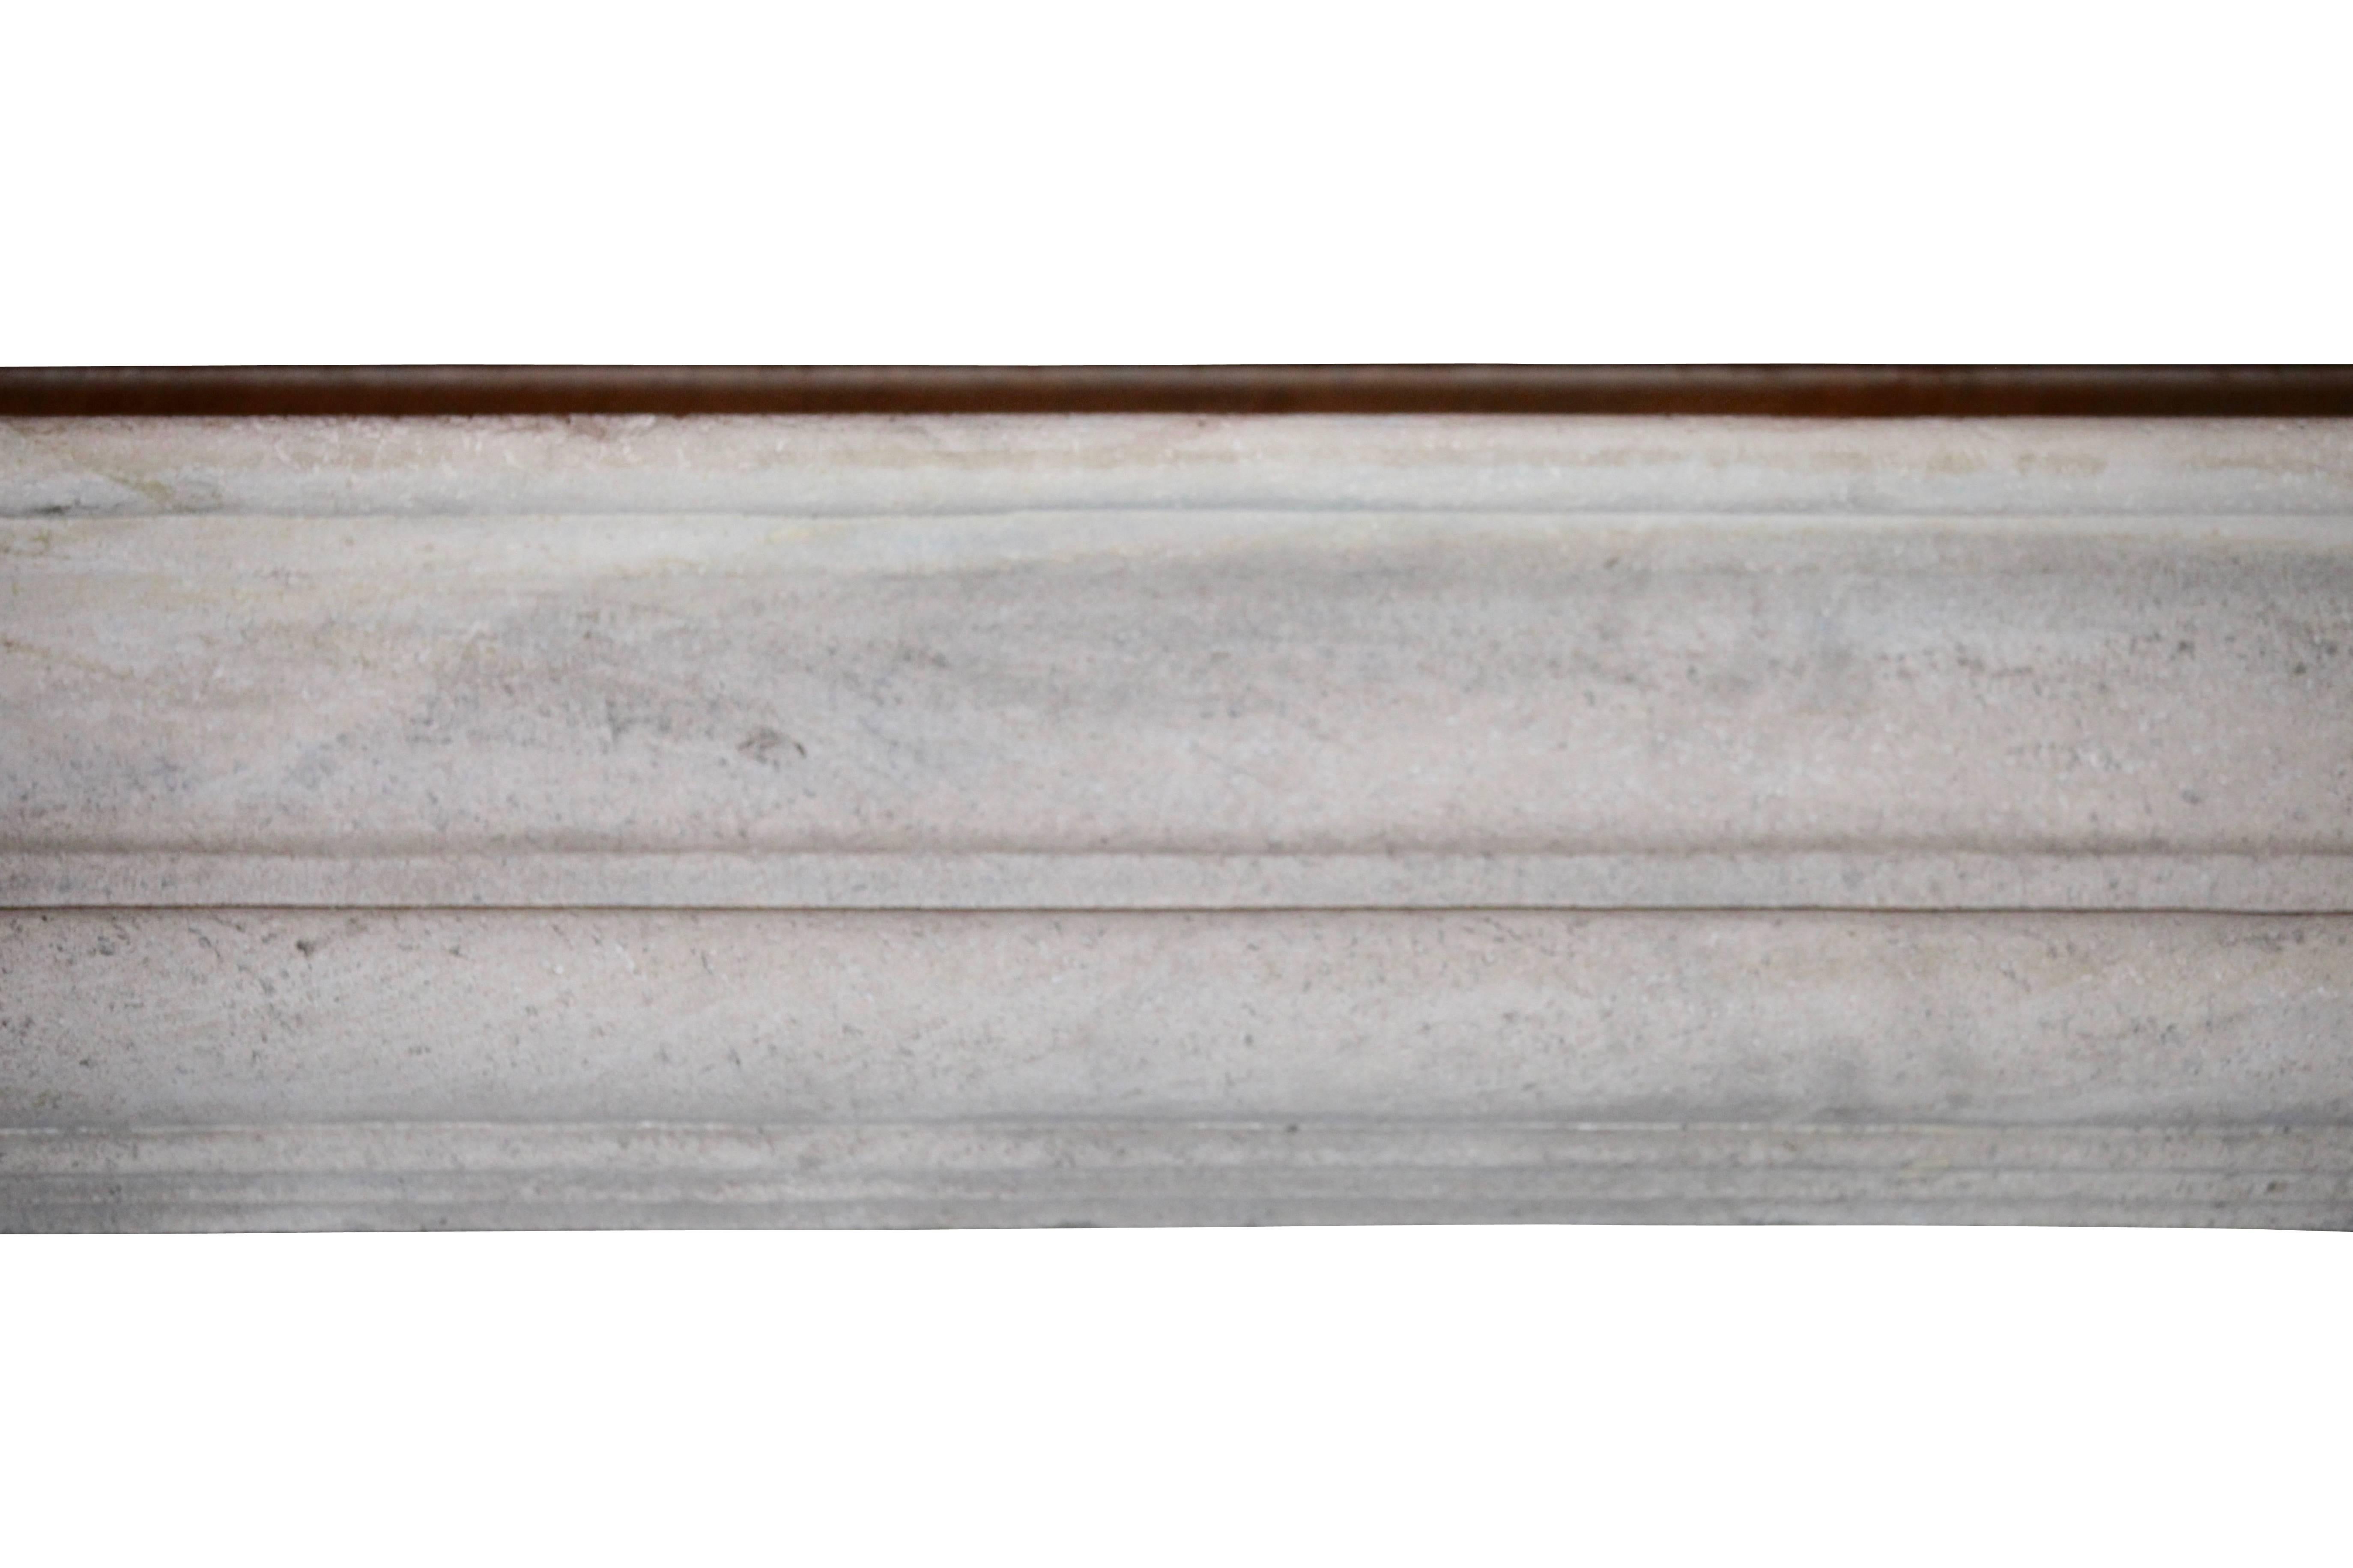 French country and naive limestone fireplace surround with remains of the original patina.
Measures:
131 cm EW 51.57".
125 cm EH 49.21".
100 cm IW 39.37".
101 cm IH 39.76".
22 cm S 8.66".
46 cm L 18.11".
340